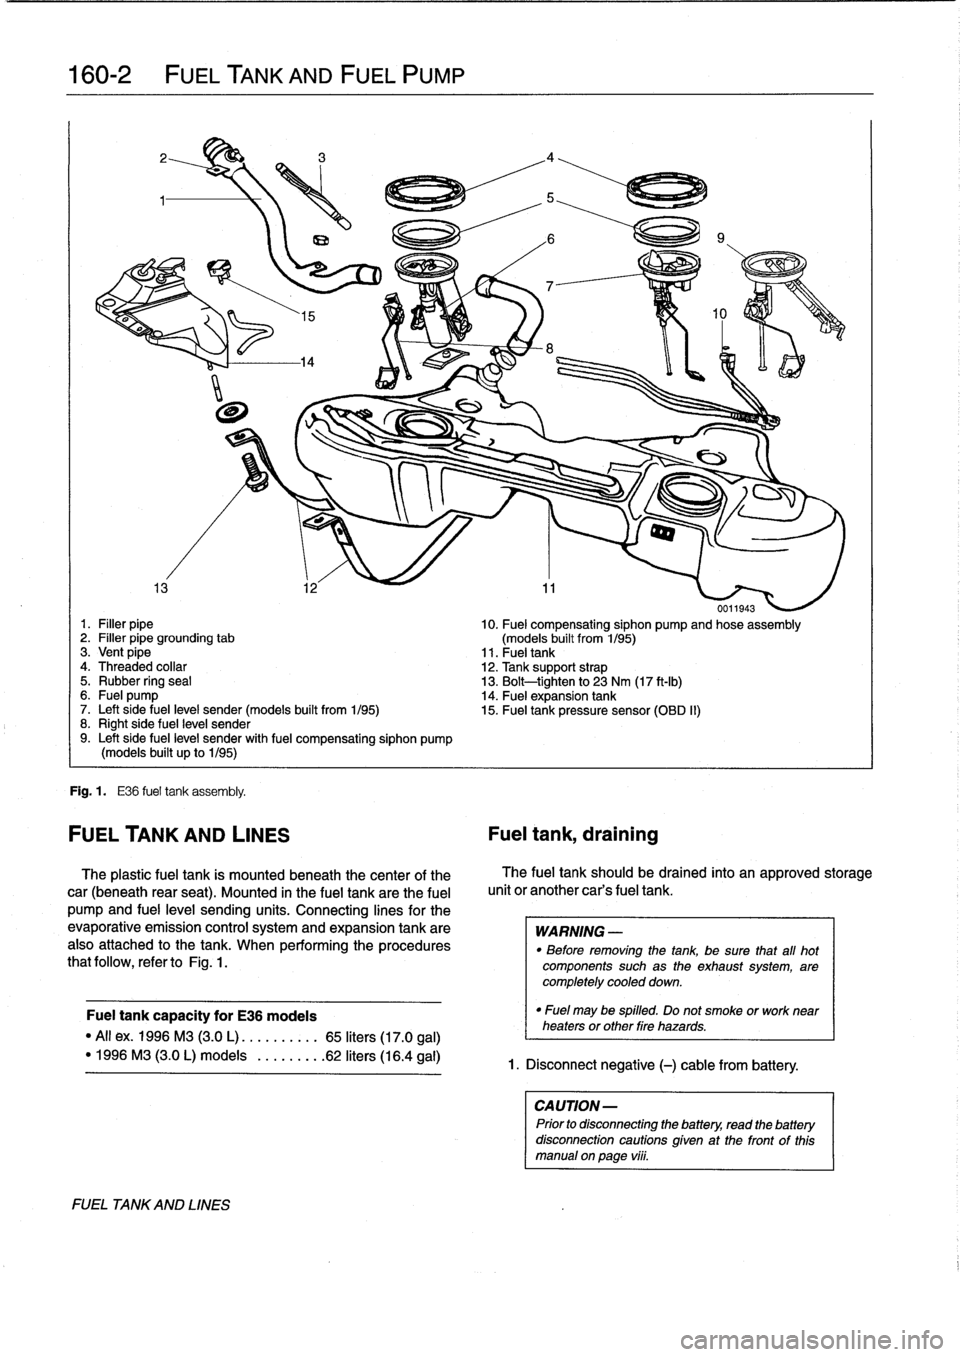 BMW 323i 1995 E36 Workshop Manual 
160-2

	

FUEL
TANK
AND
FUEL
PUMP

0011943
1
.
Filler
pipe

	

10
.
Fuel
compensating
siphon
pump
and
hose
assembly
2
.
Filler
pipe
grounding
tab

	

(models
built
from
1/95)
3
.
Vent
pipe

	

11
.
F